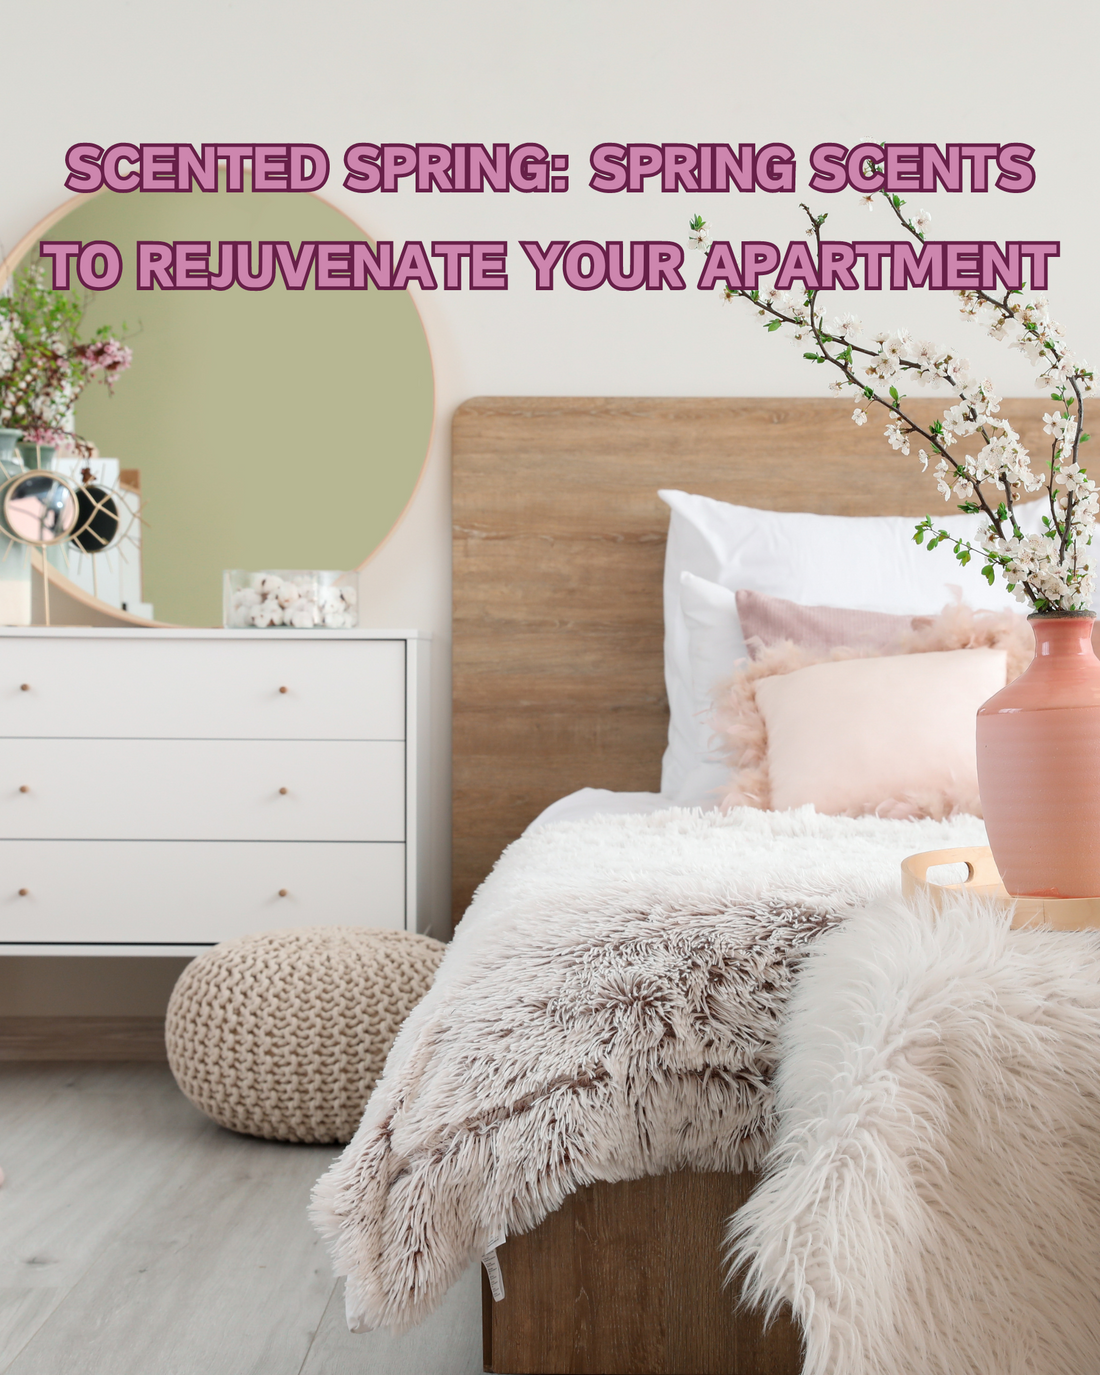 Scented Spring: Spring Scents to Rejuvenate Your Apartment